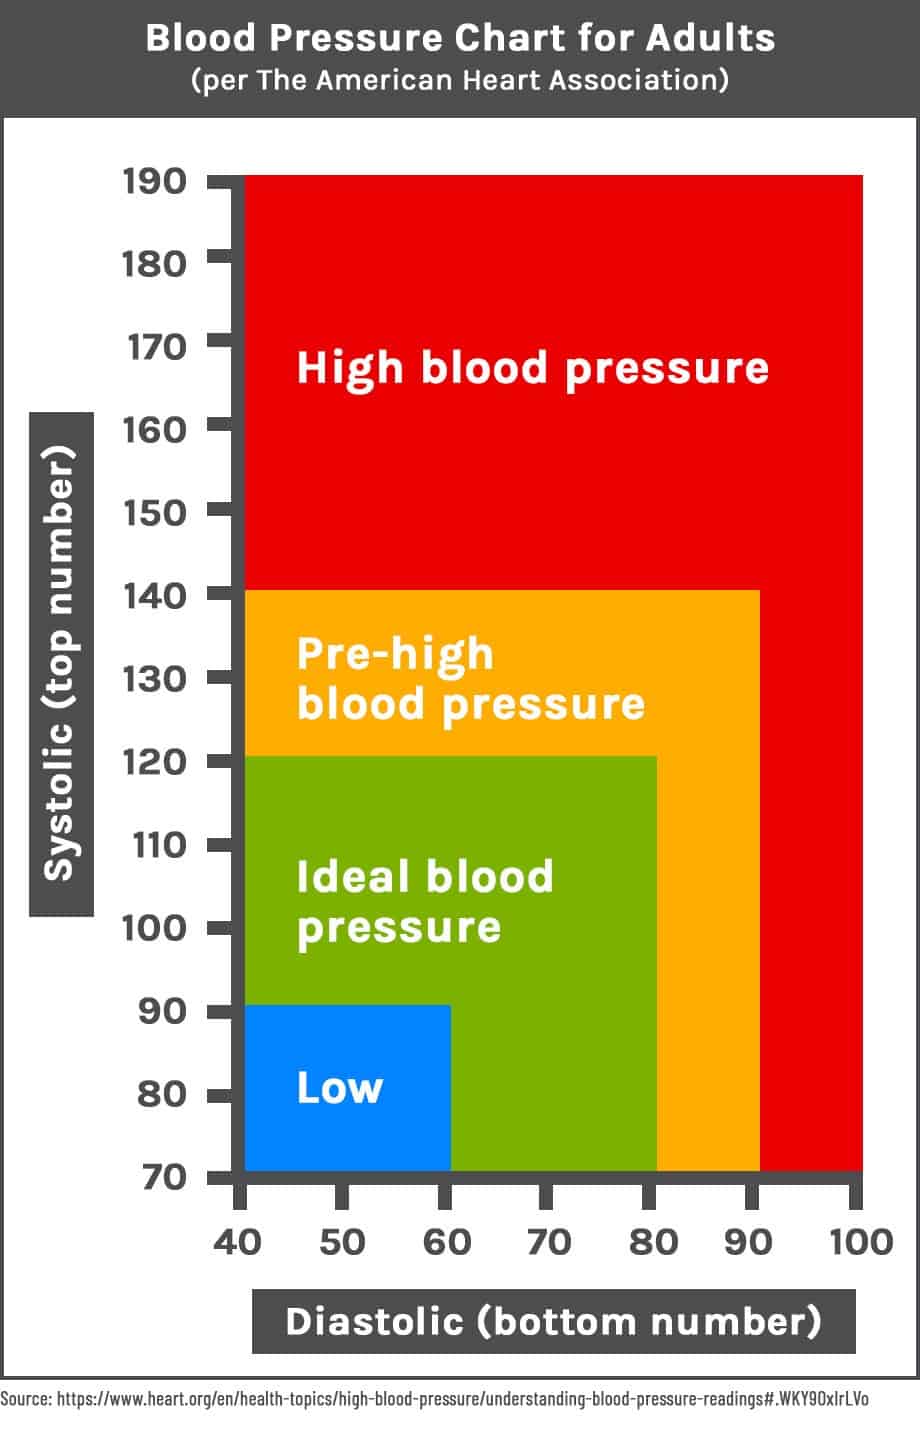 Blood pressure chart with info from American Heart Association